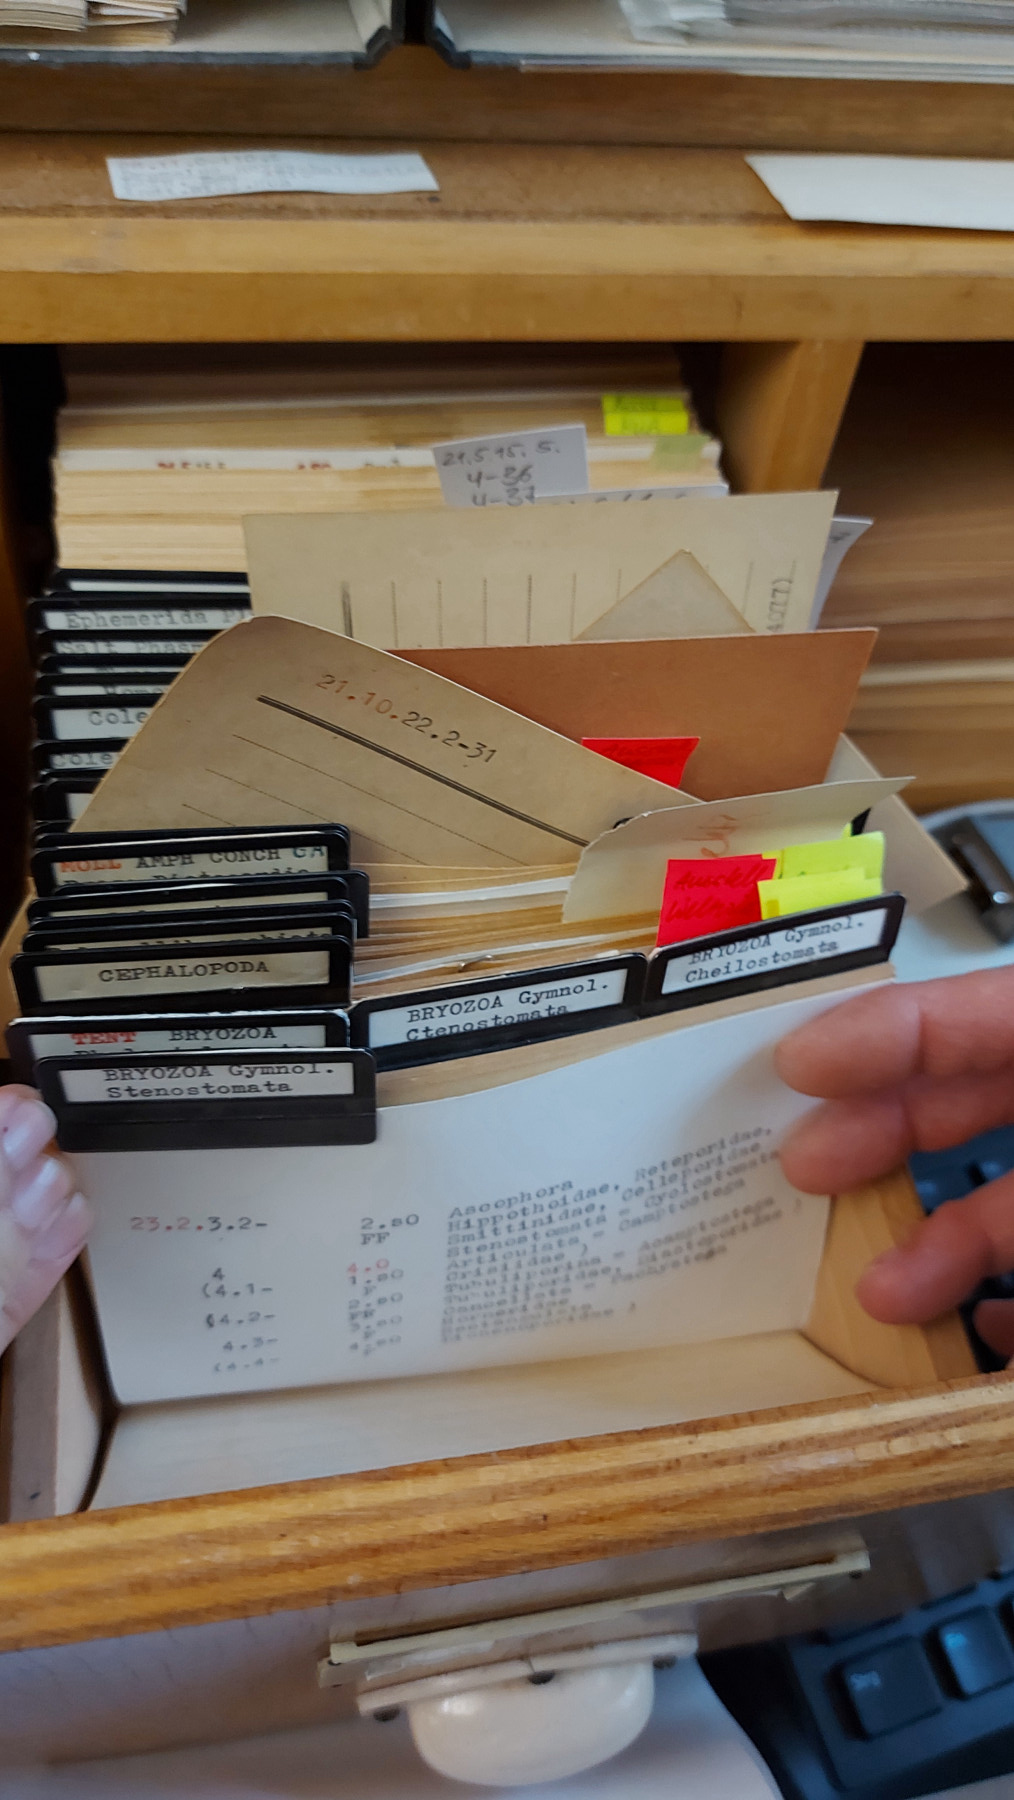 A narrow wooden box with postcard-sized printed cards. Tabs have been attached to some of the cards, some of them stick out at an angle, and some of them have been marked with small yellow or red stickers. The wooden box is one of many in the card catalogue that can be pulled out of a shelf like a drawer.